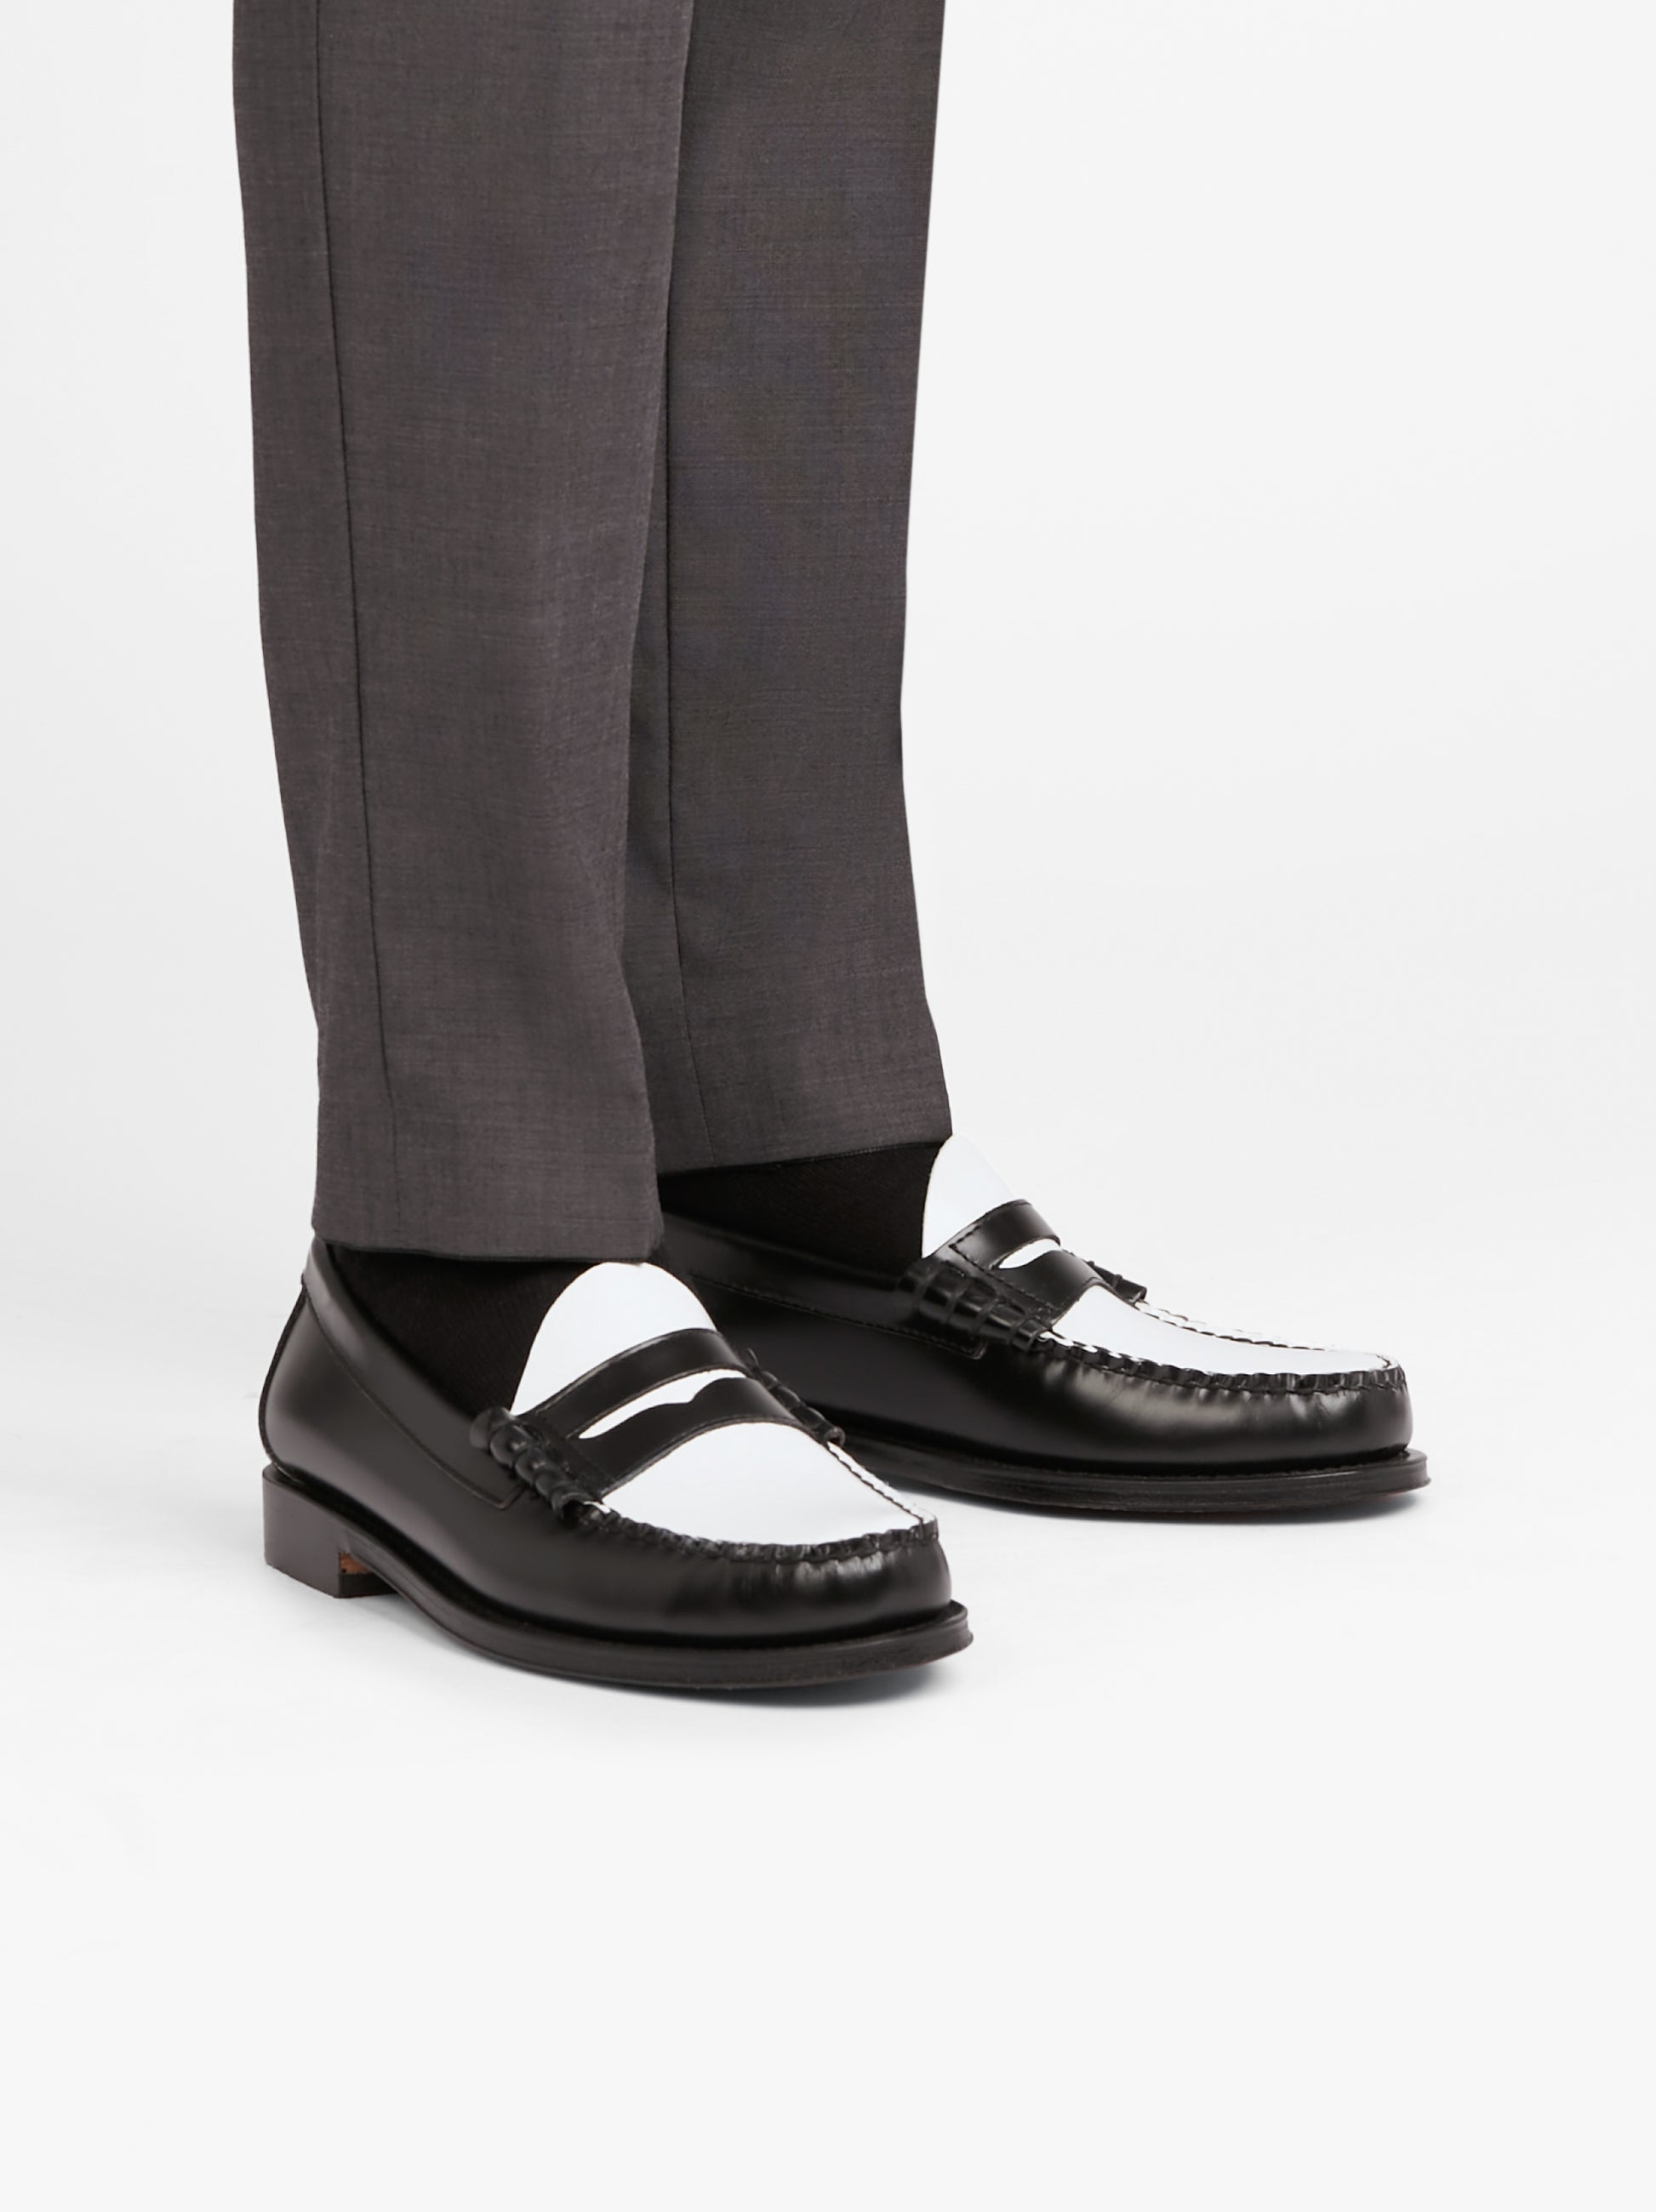 Black And White Mens Penny Loafers | Black And White Loafers 